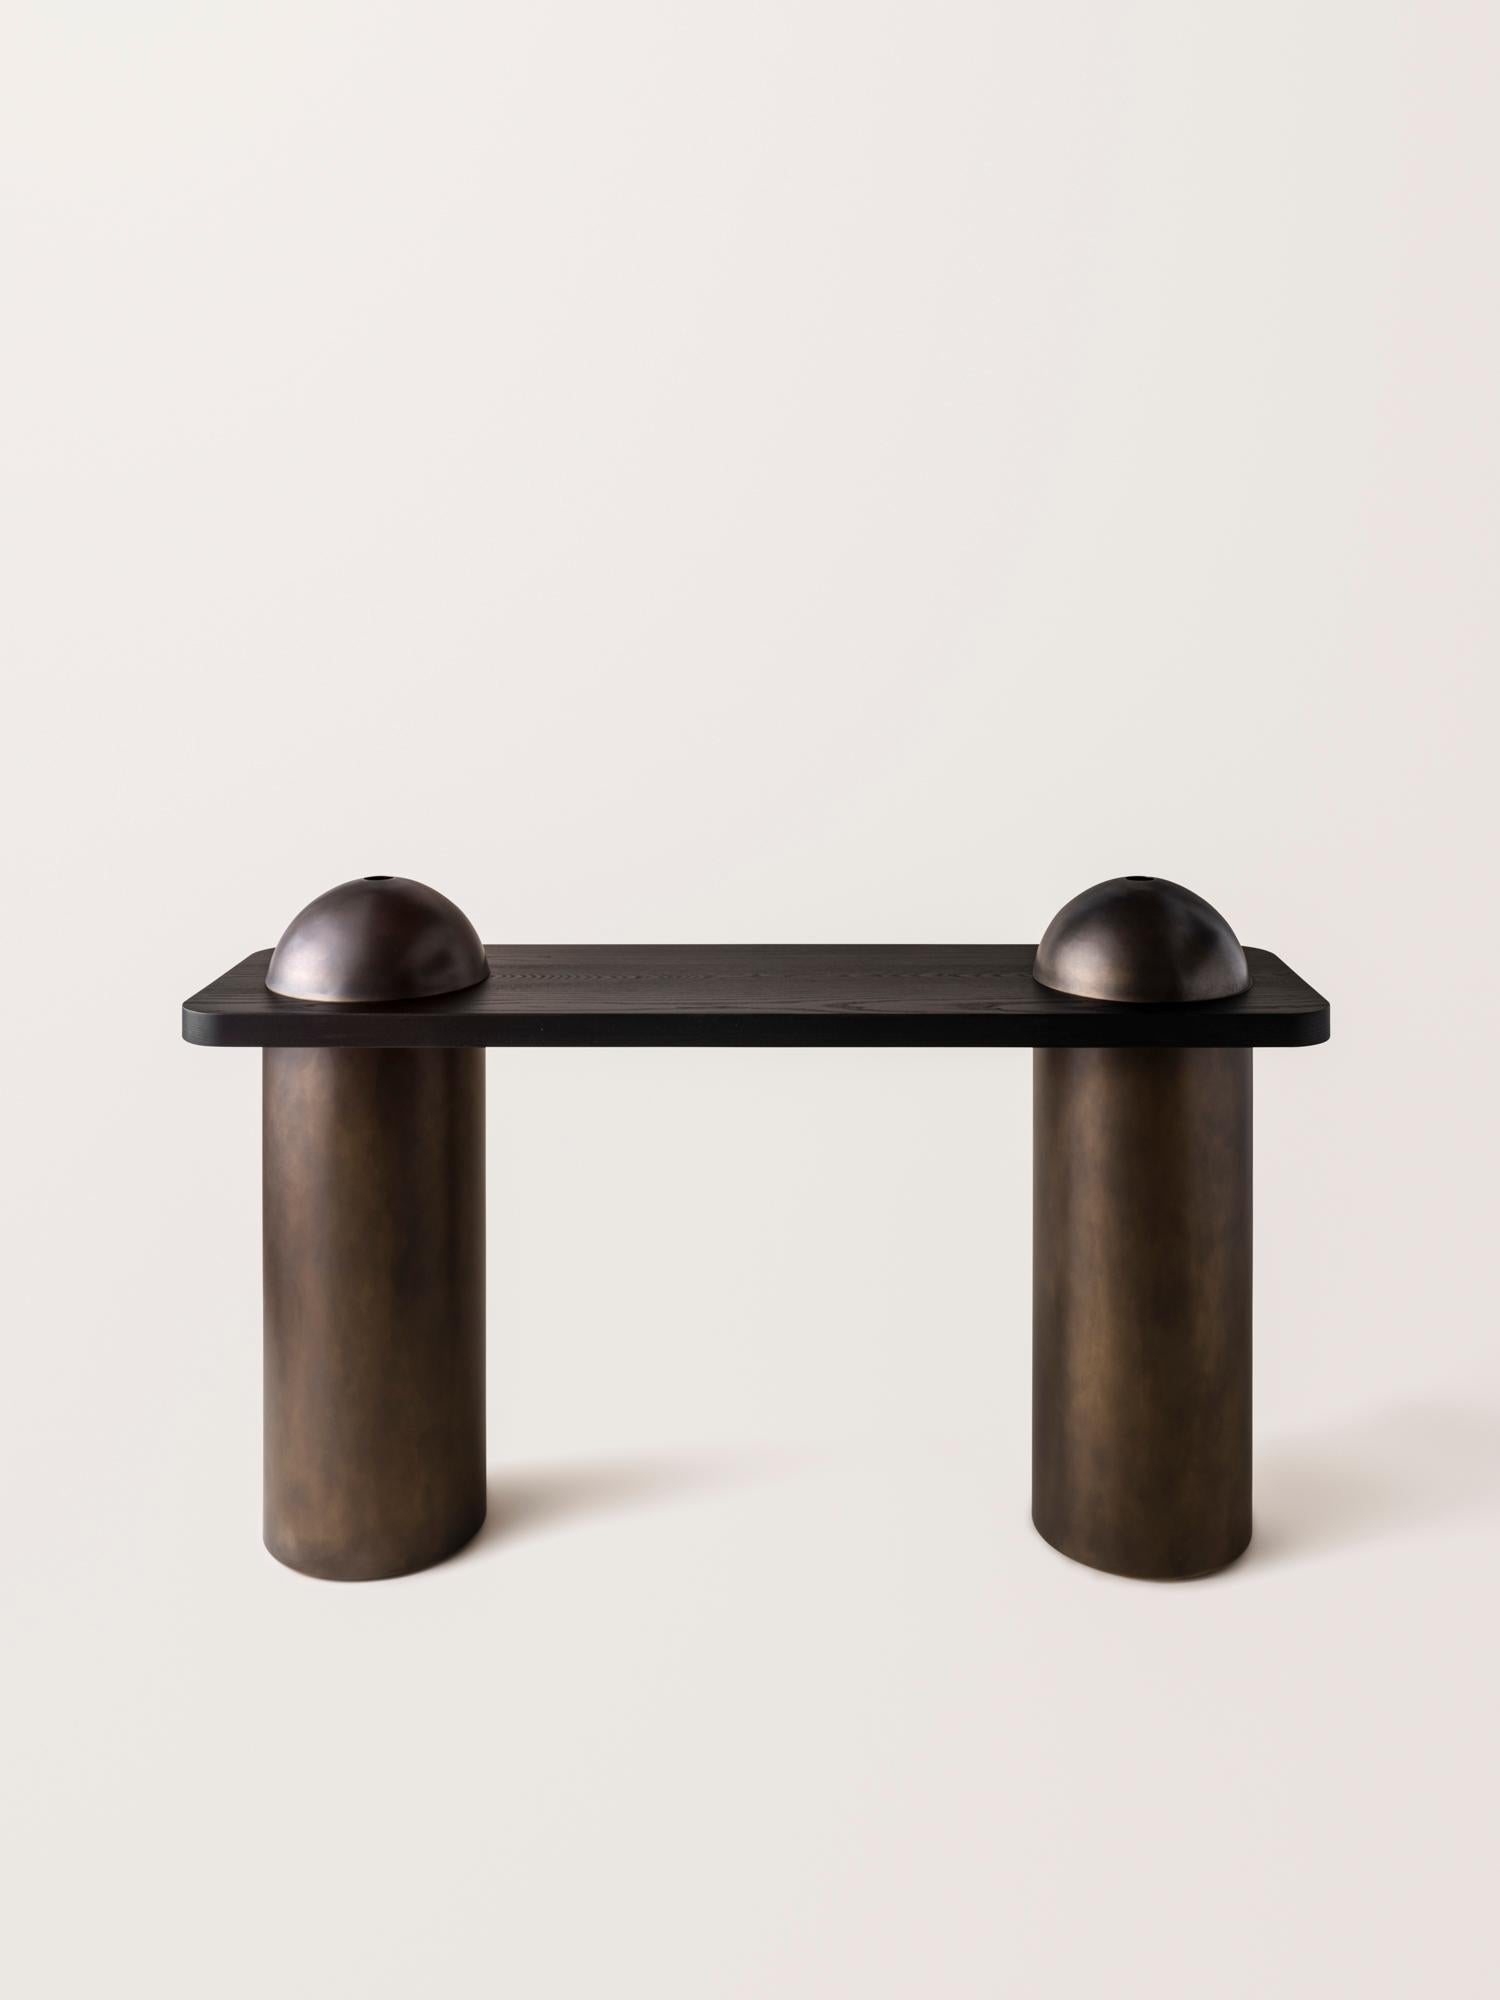 American Silo Console Table - Blackened Ash and Oil-Rubbed Bronze (with Domes) For Sale